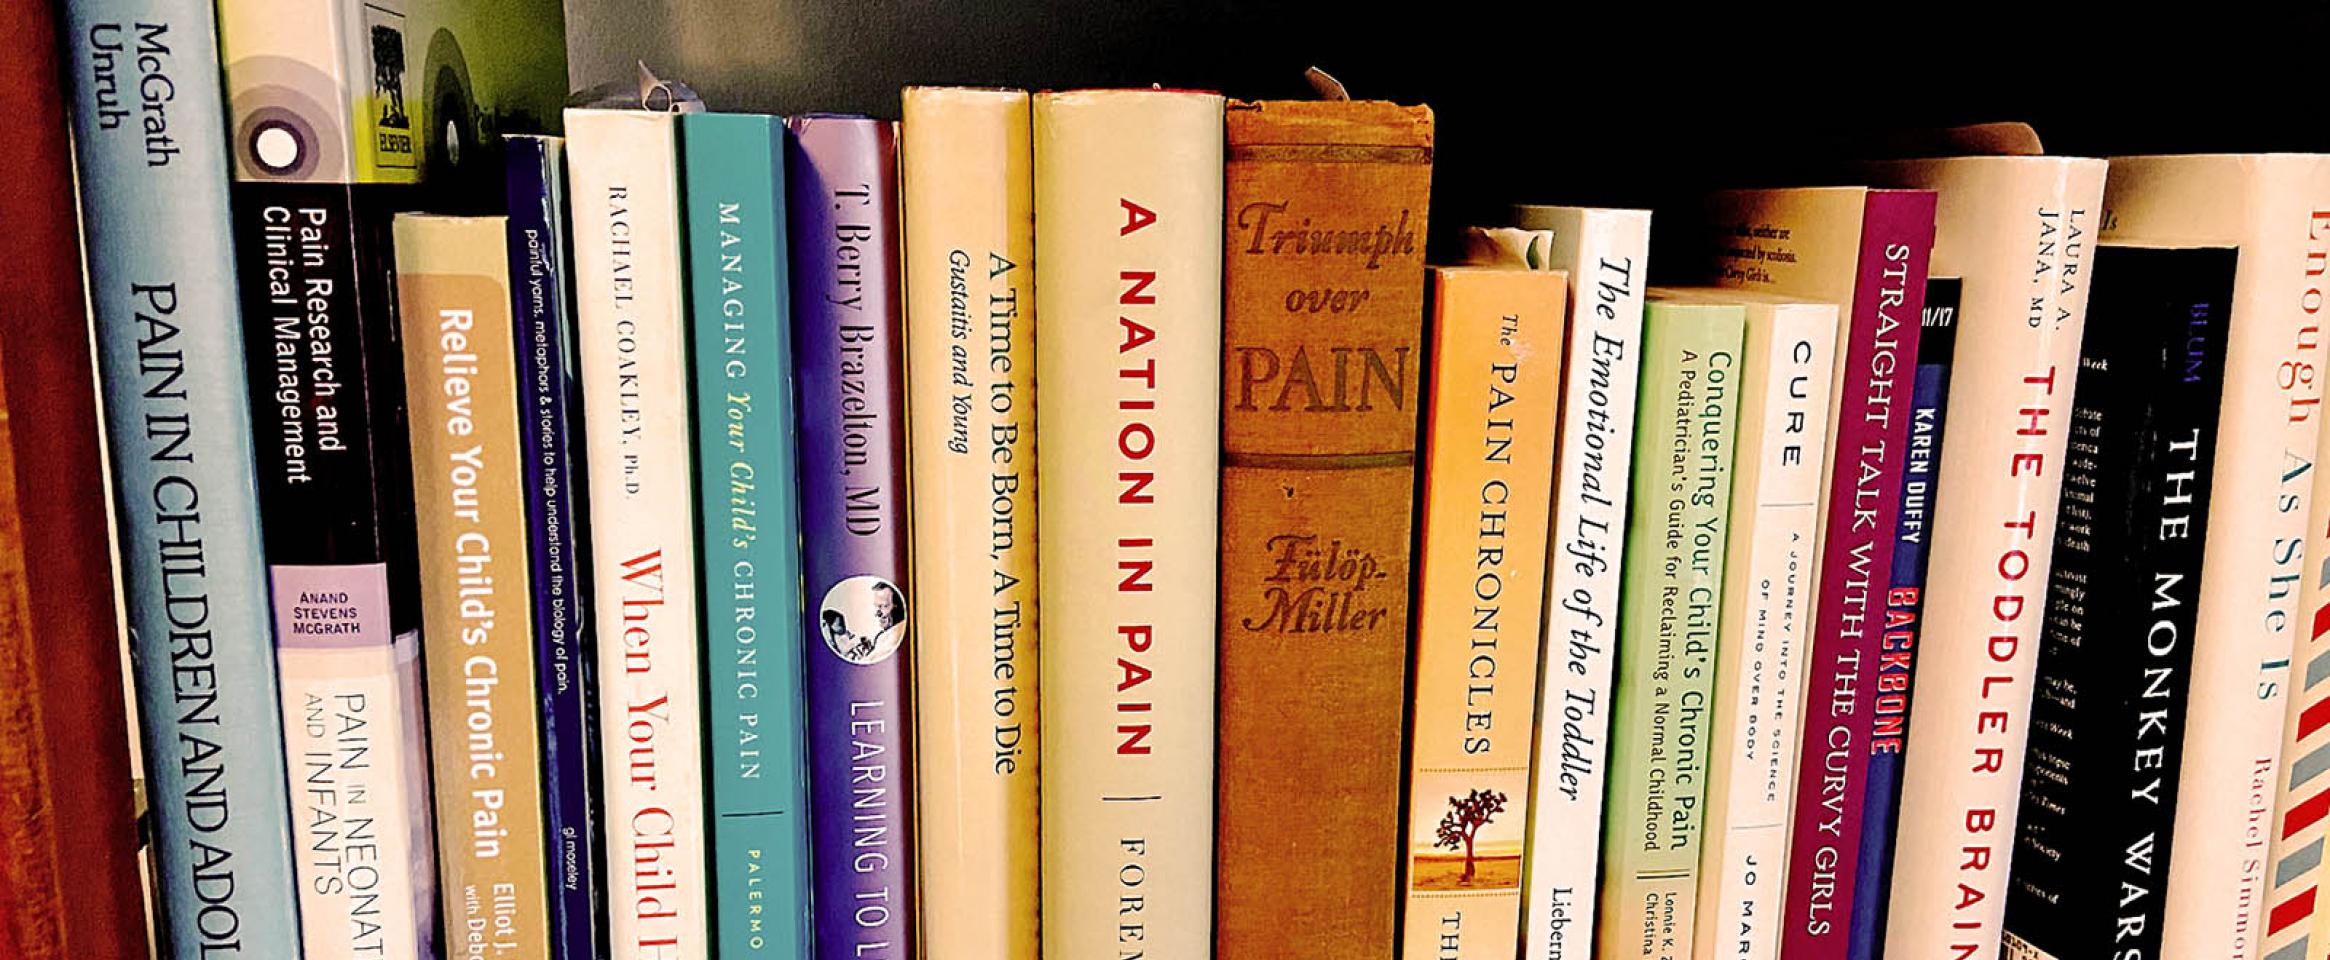 Rectangular photo of a row of books on a wooden bookshelf, with many titles related to the science of pain and children's health, some new and some visibly old.